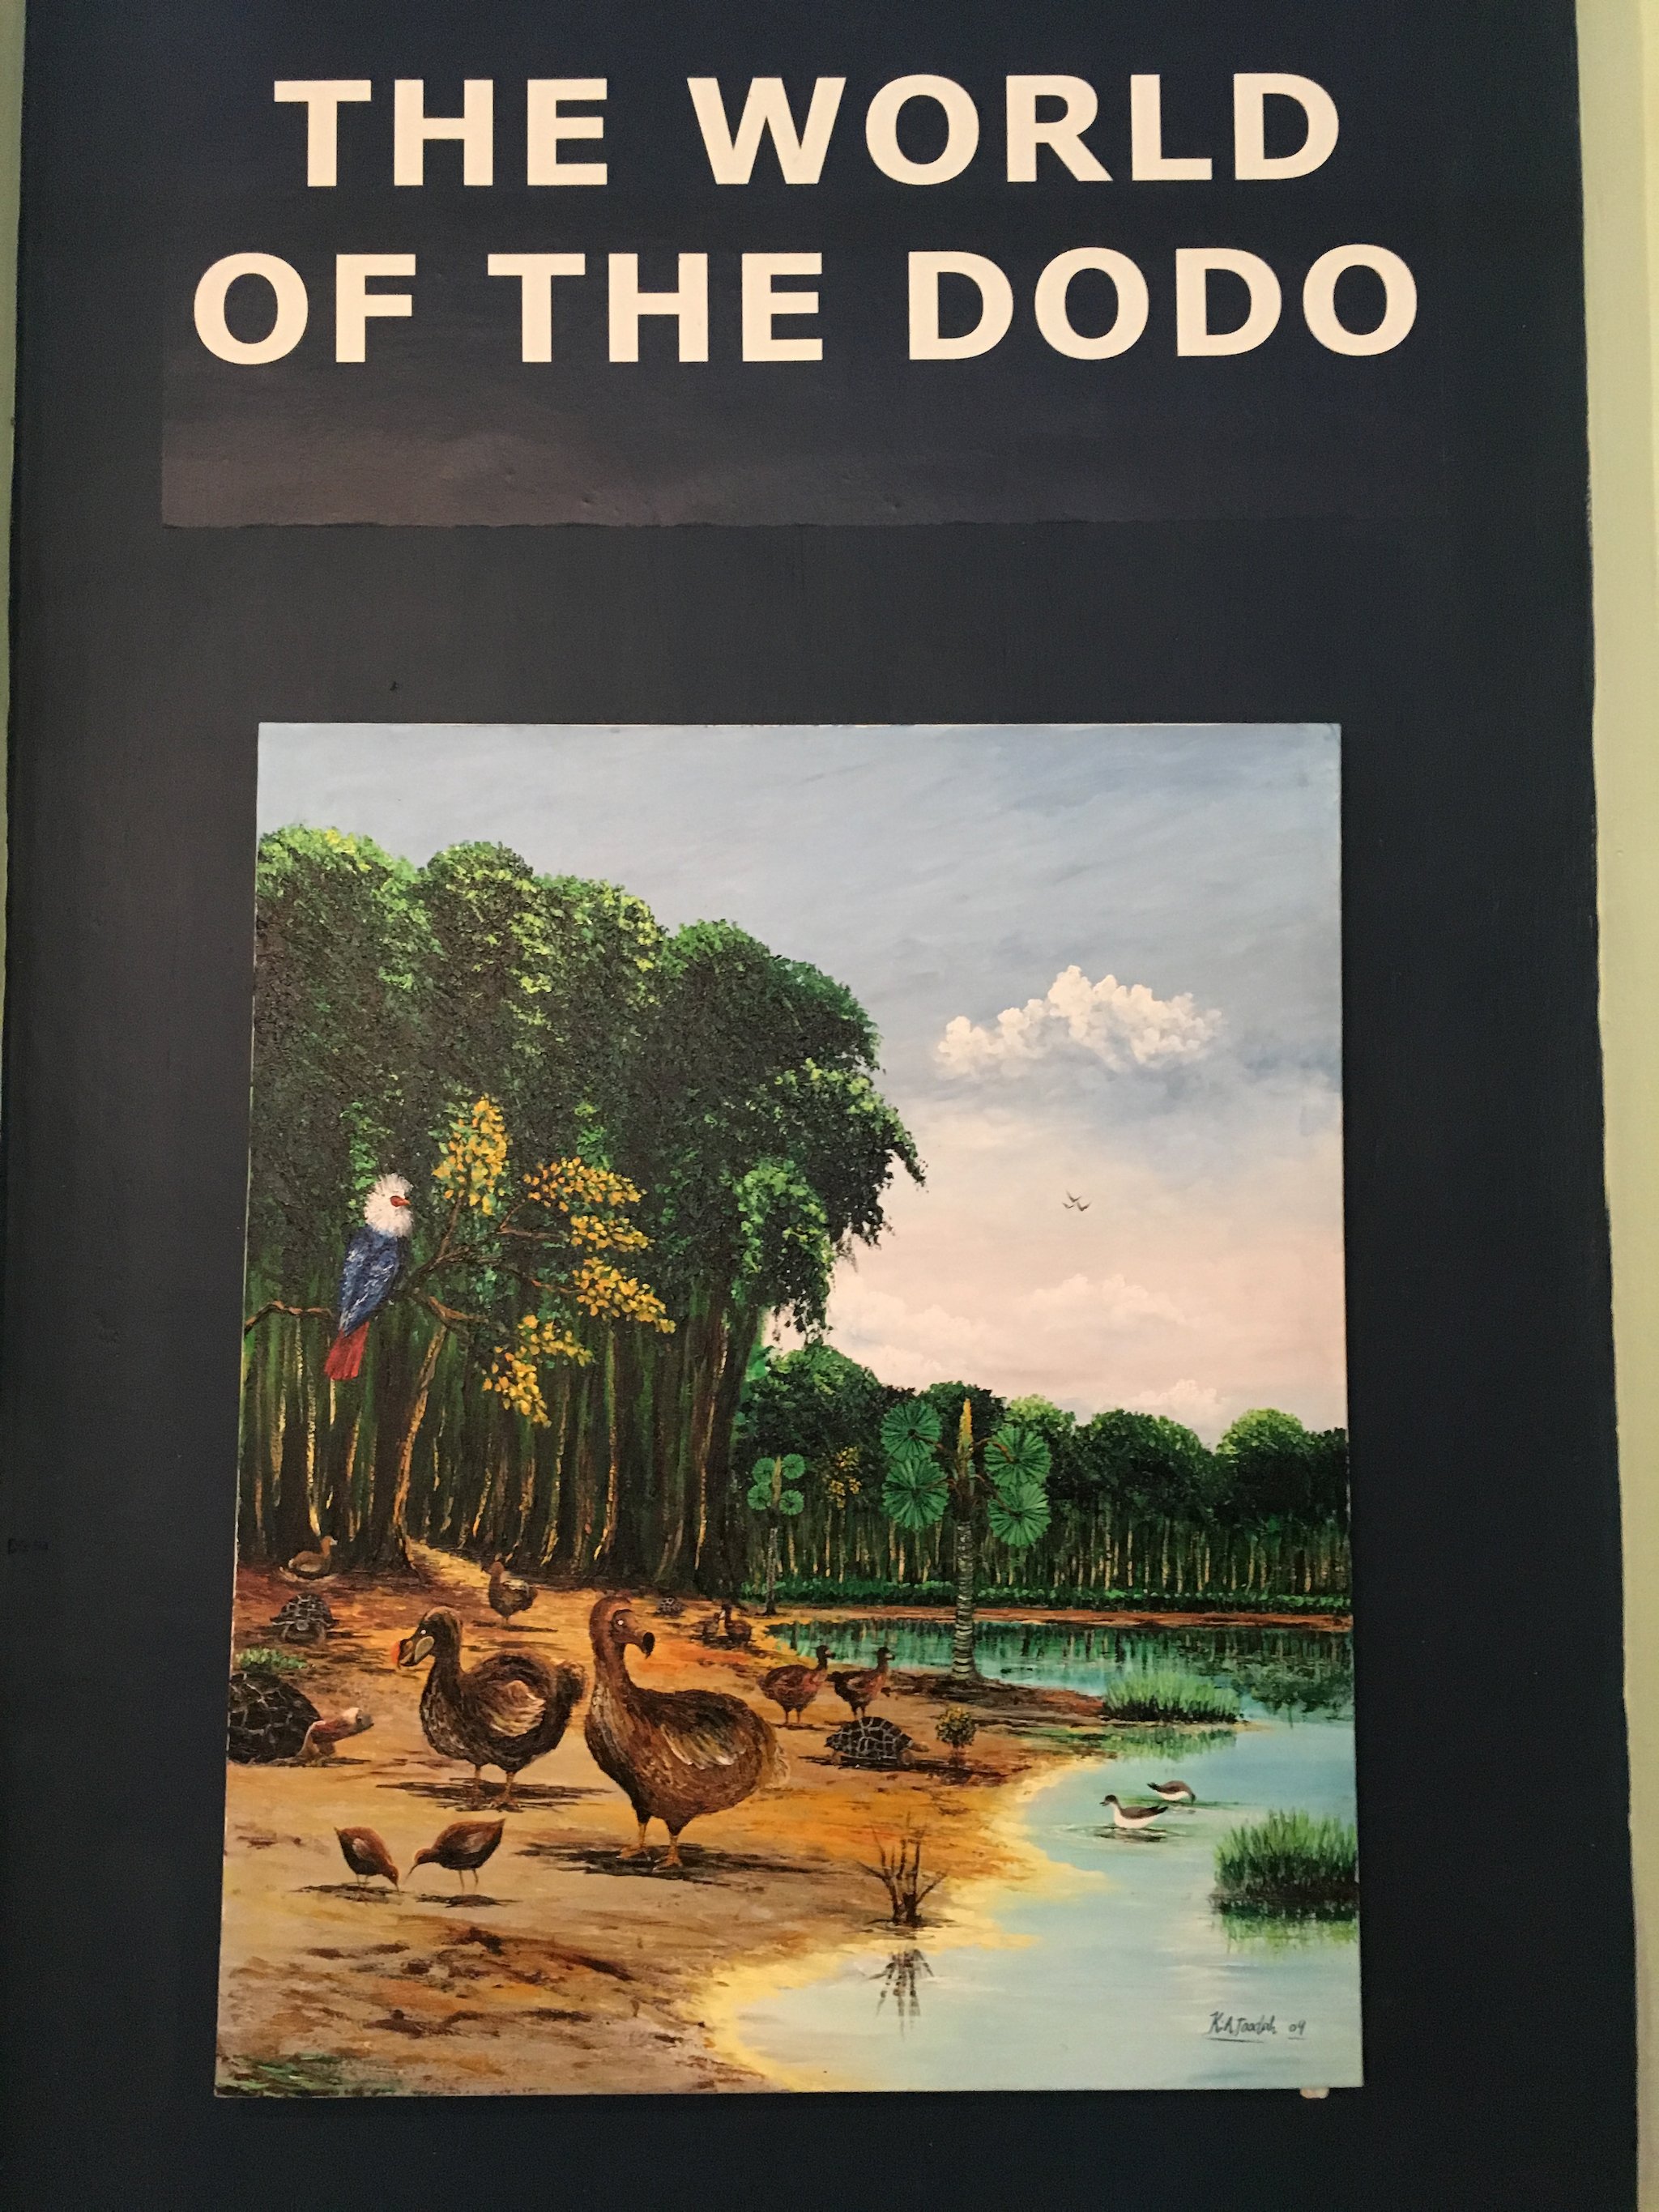 The World of the Dodo exhibit at Mauritius Natural History Museum